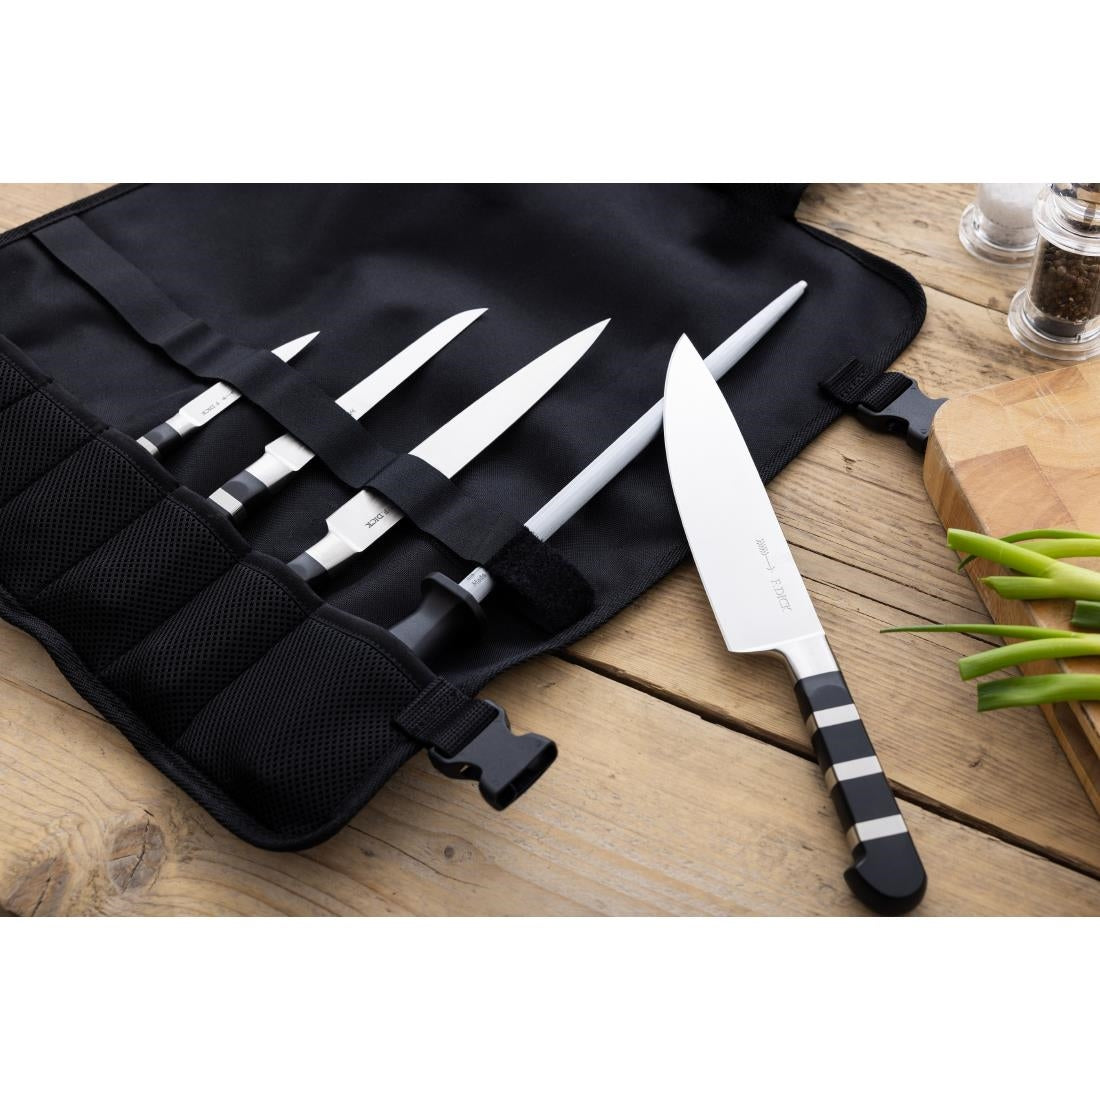 Dick 1905 5 Piece Fully Forged Knife Set with Wallet JD Catering Equipment Solutions Ltd